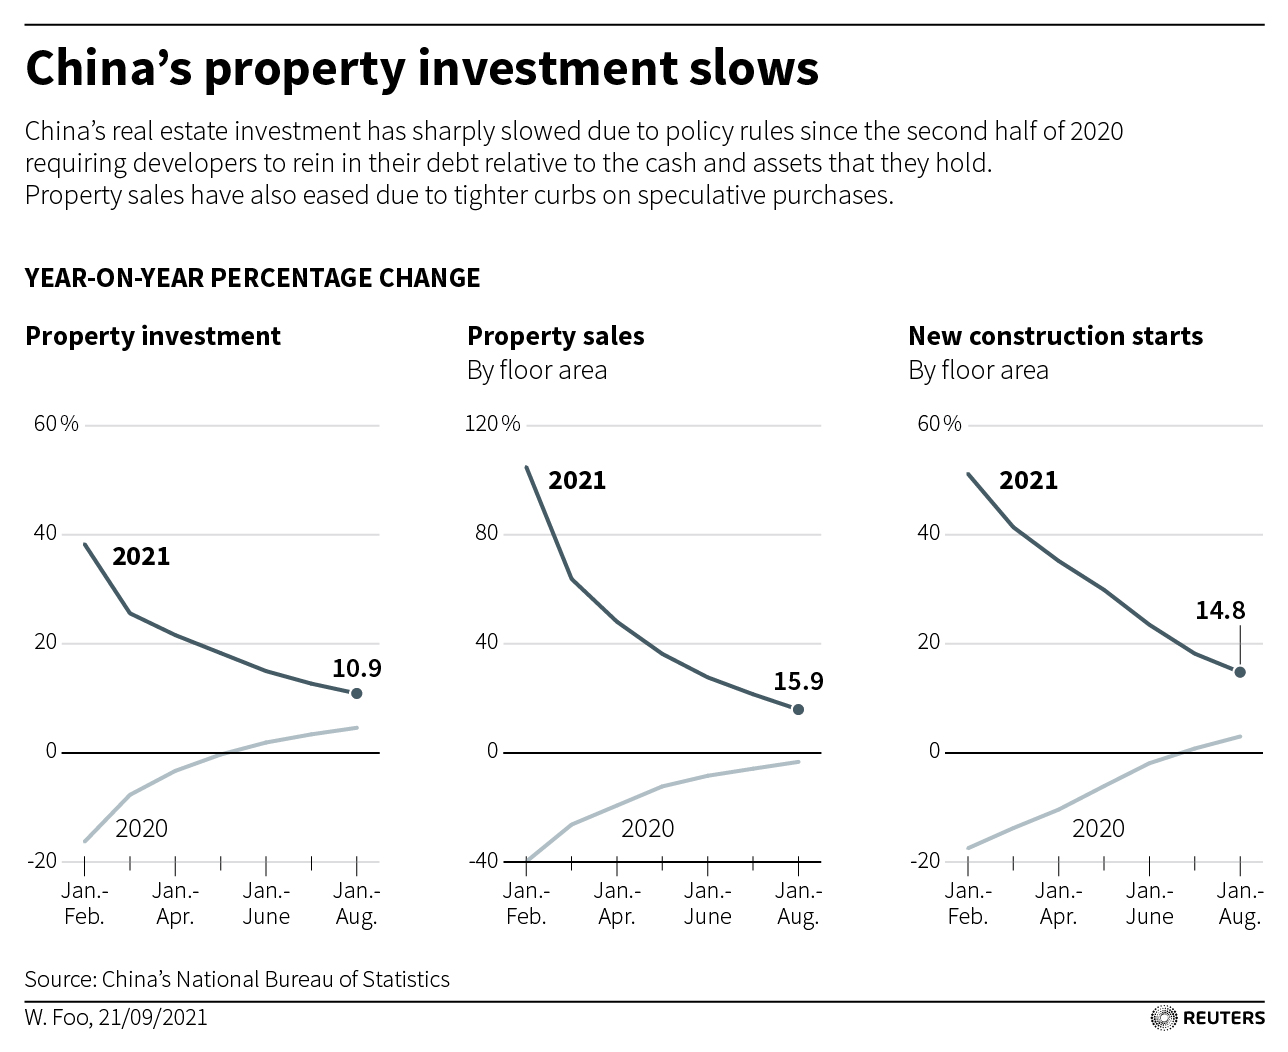 Charts showing the year-over-year percentage change in real estate investment, real estate sales and new construction starts.